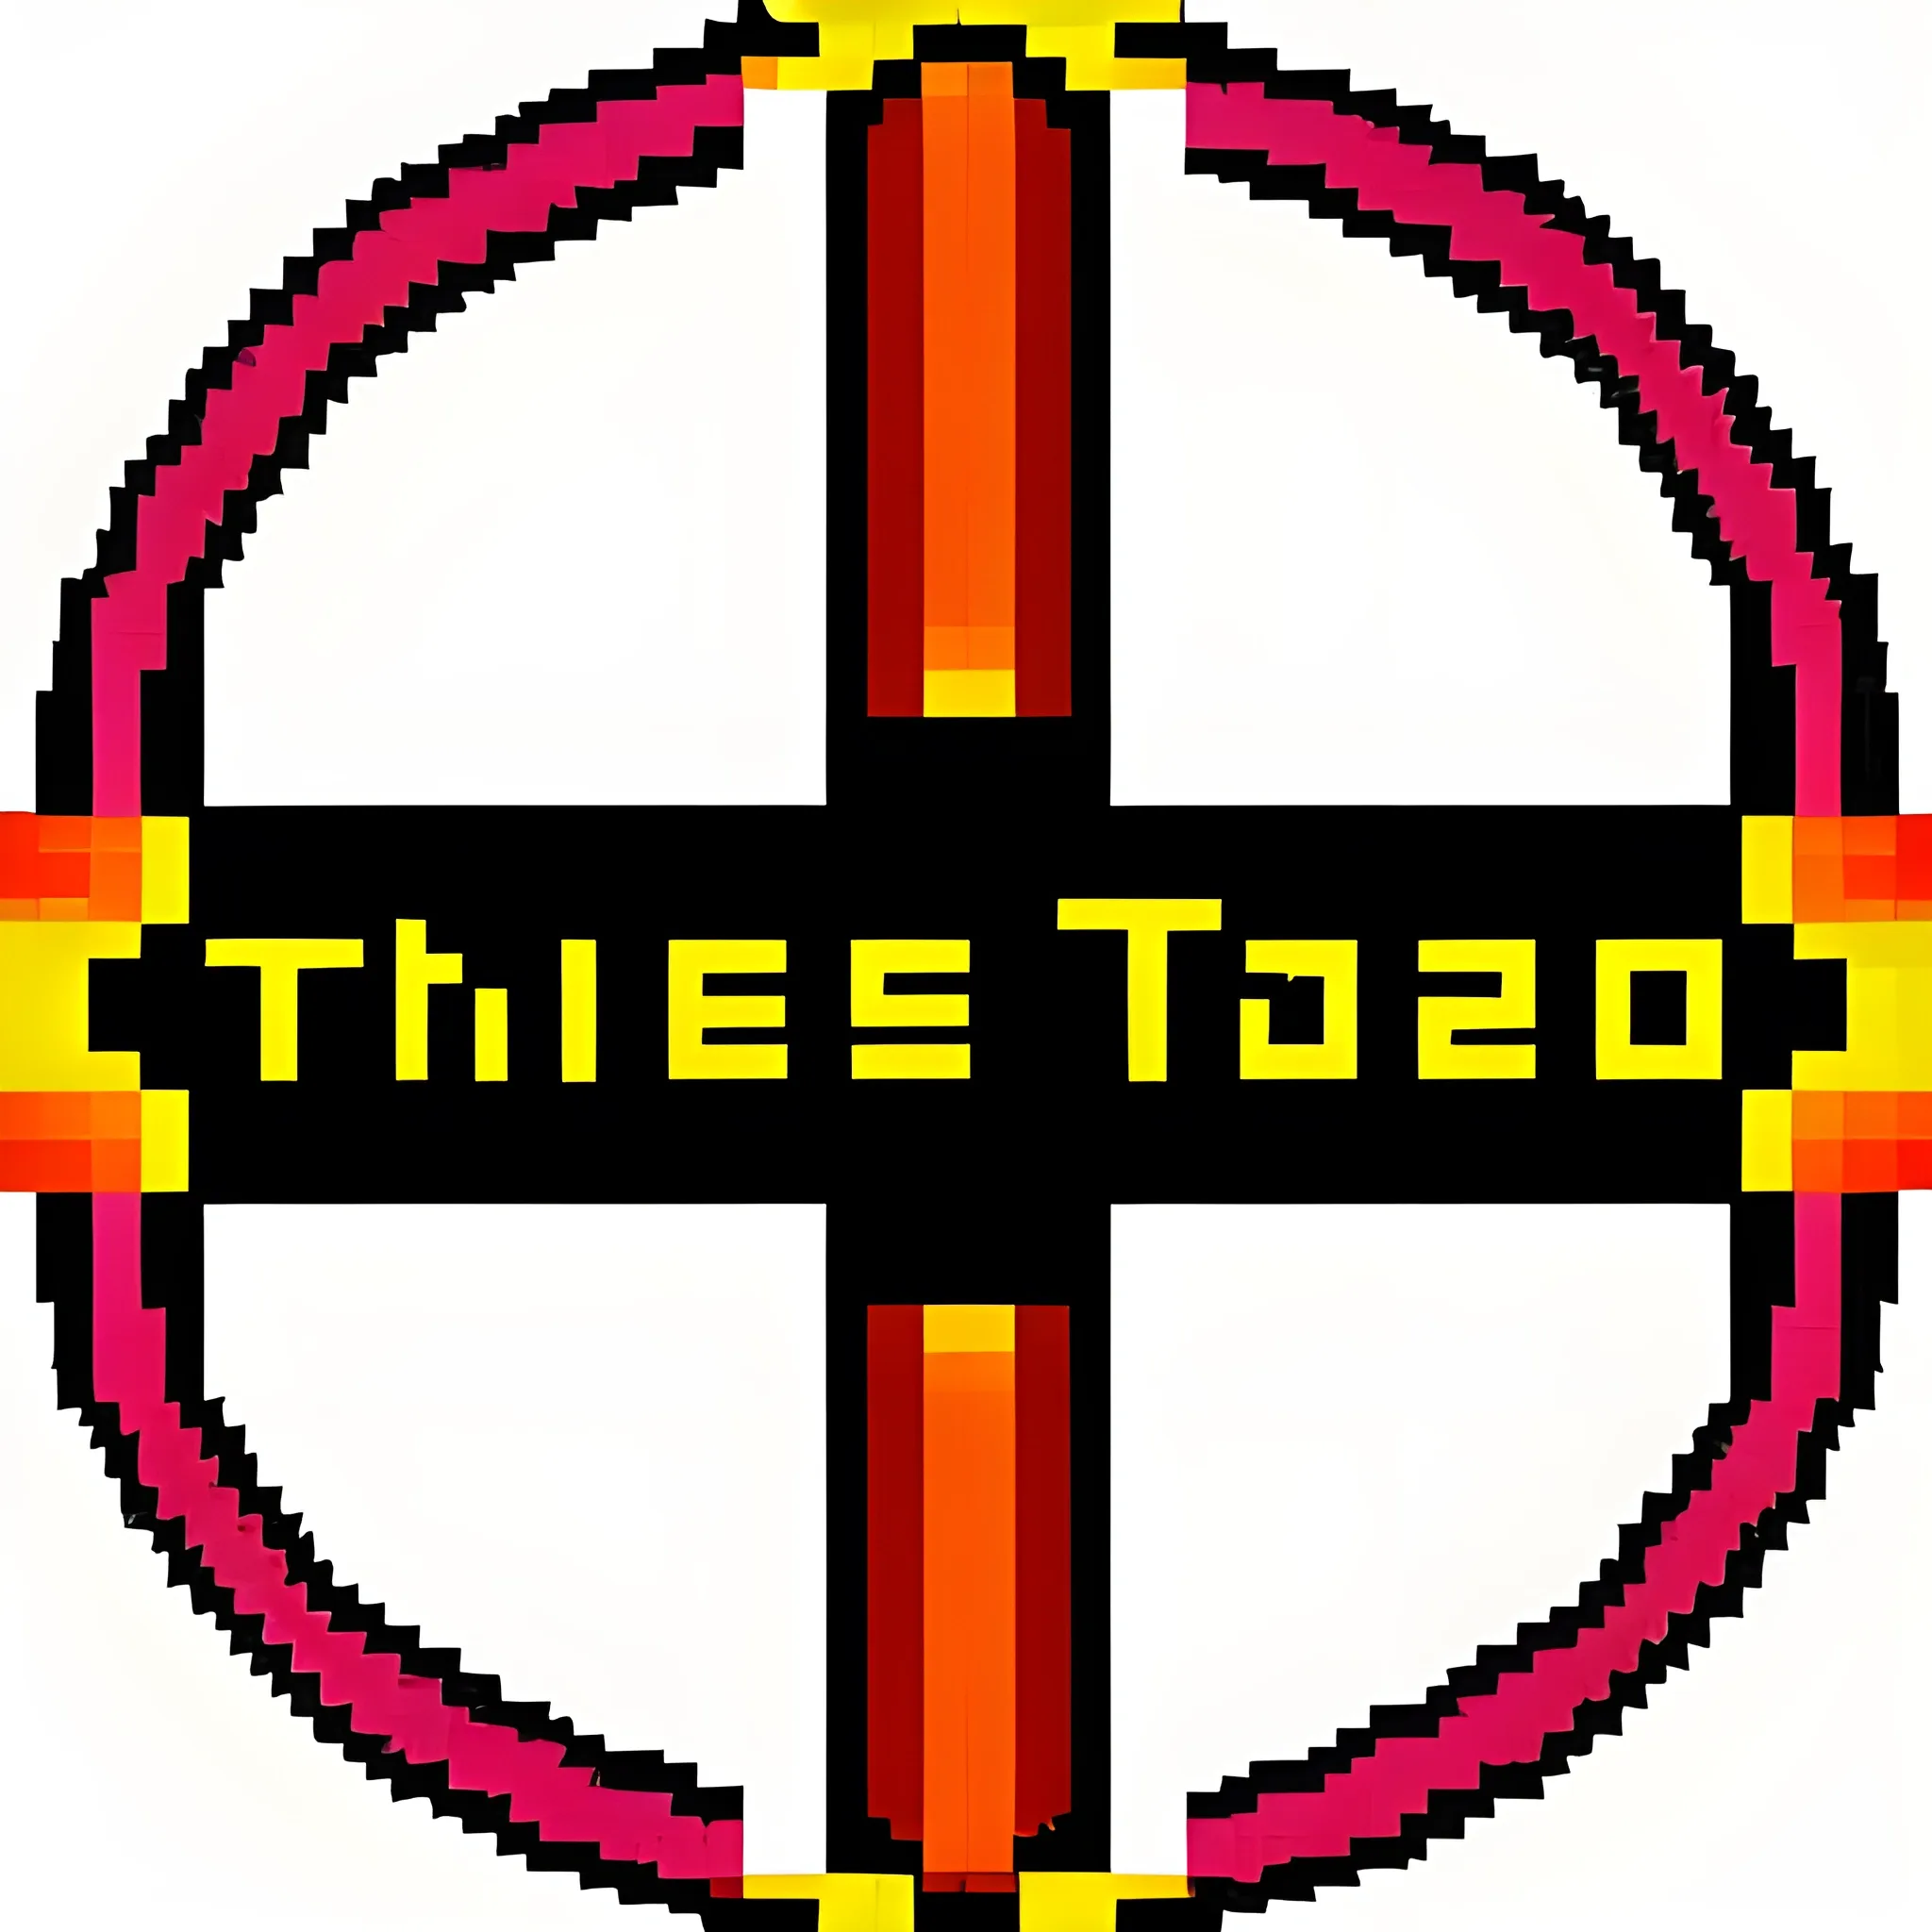 A logo for TP where T is made using threads and P is done using pixels
The final logo must contain both letter T and P
